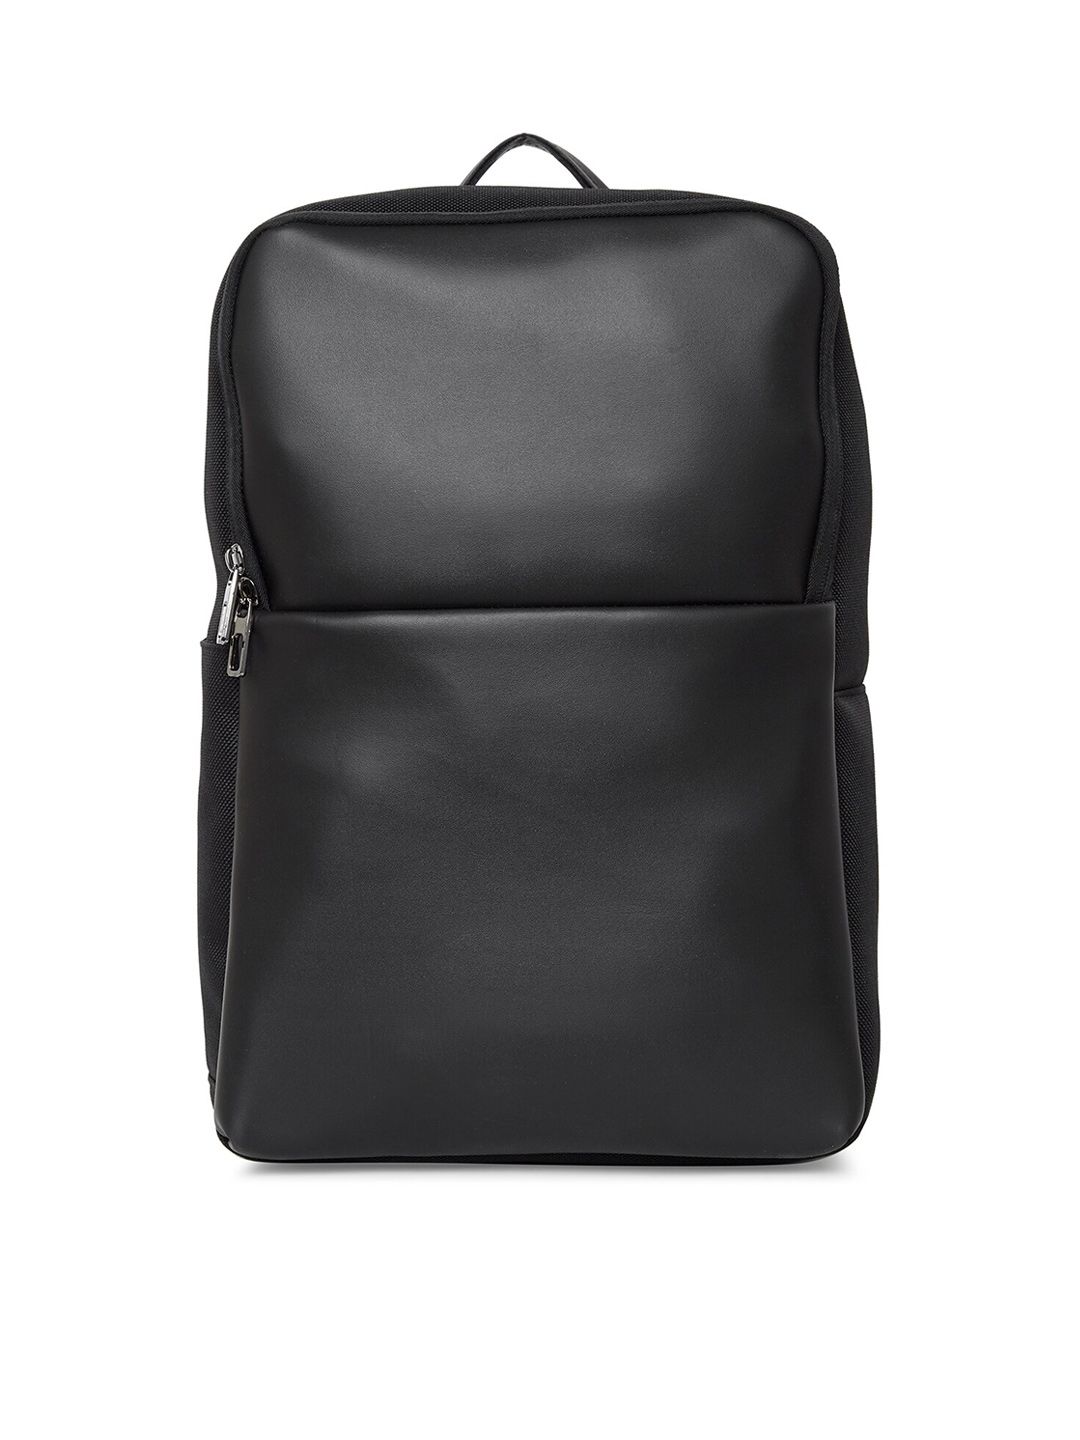 MBOSS Unisex Black Solid Laptop Backpack Price in India